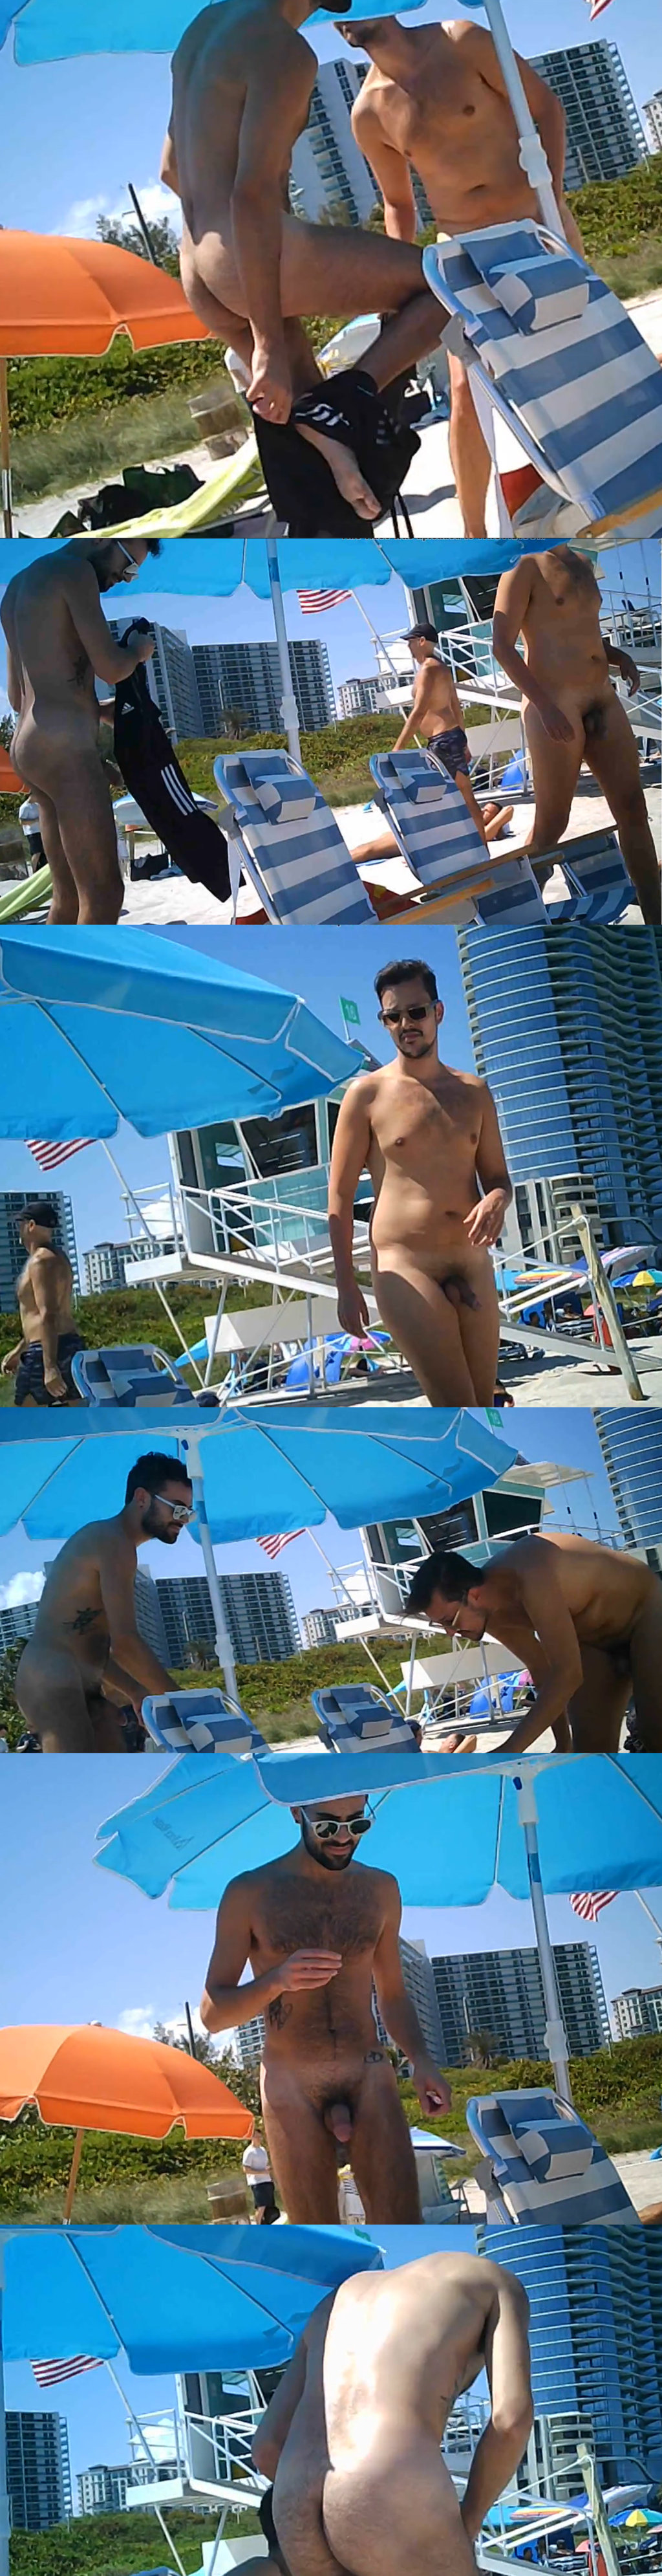 gay nudist guys caught by spycam while undressing at the beach